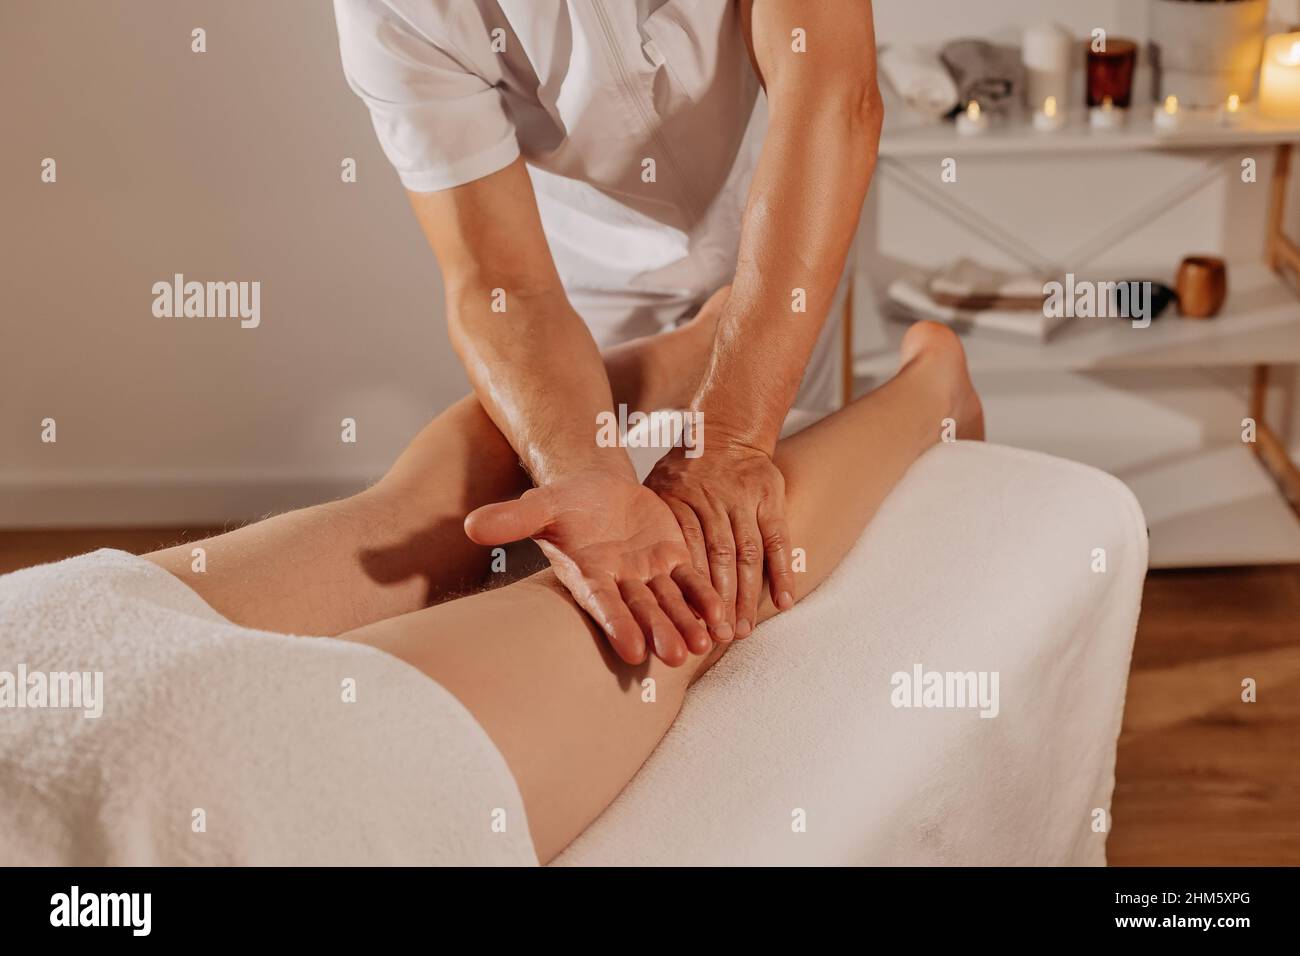 Professional legs massage in SPA salon on the background of candles. Handsome masseur therapist in white uniform making manual therapy for athlete muscles. Concept of wellness, body and health care. Stock Photo